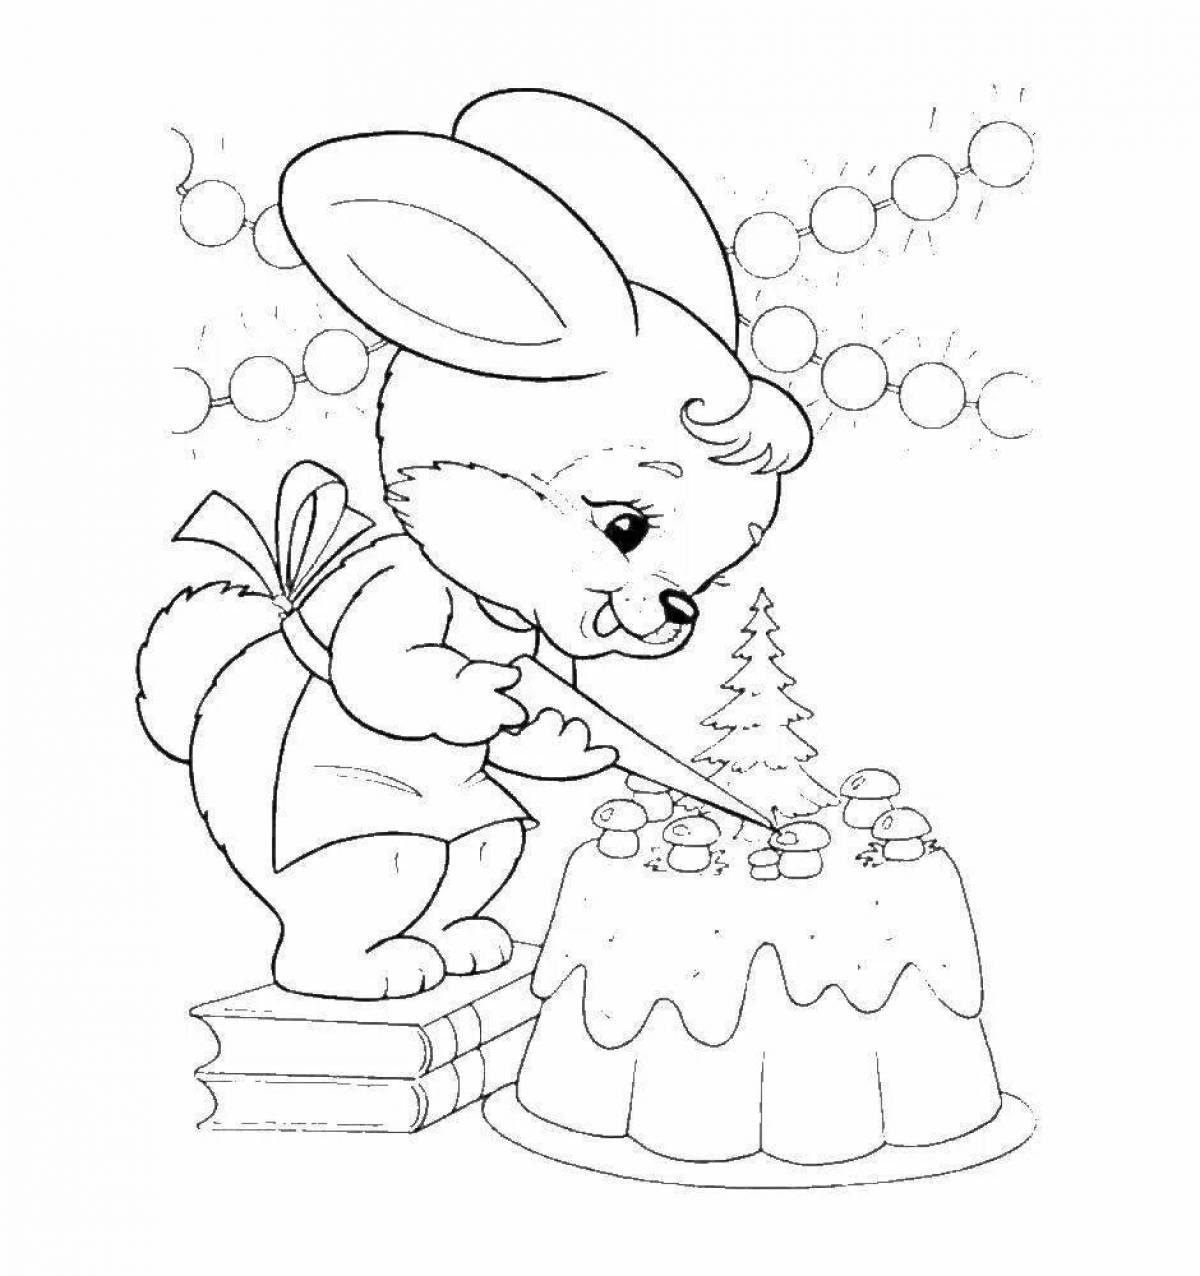 Great new year bunny coloring book